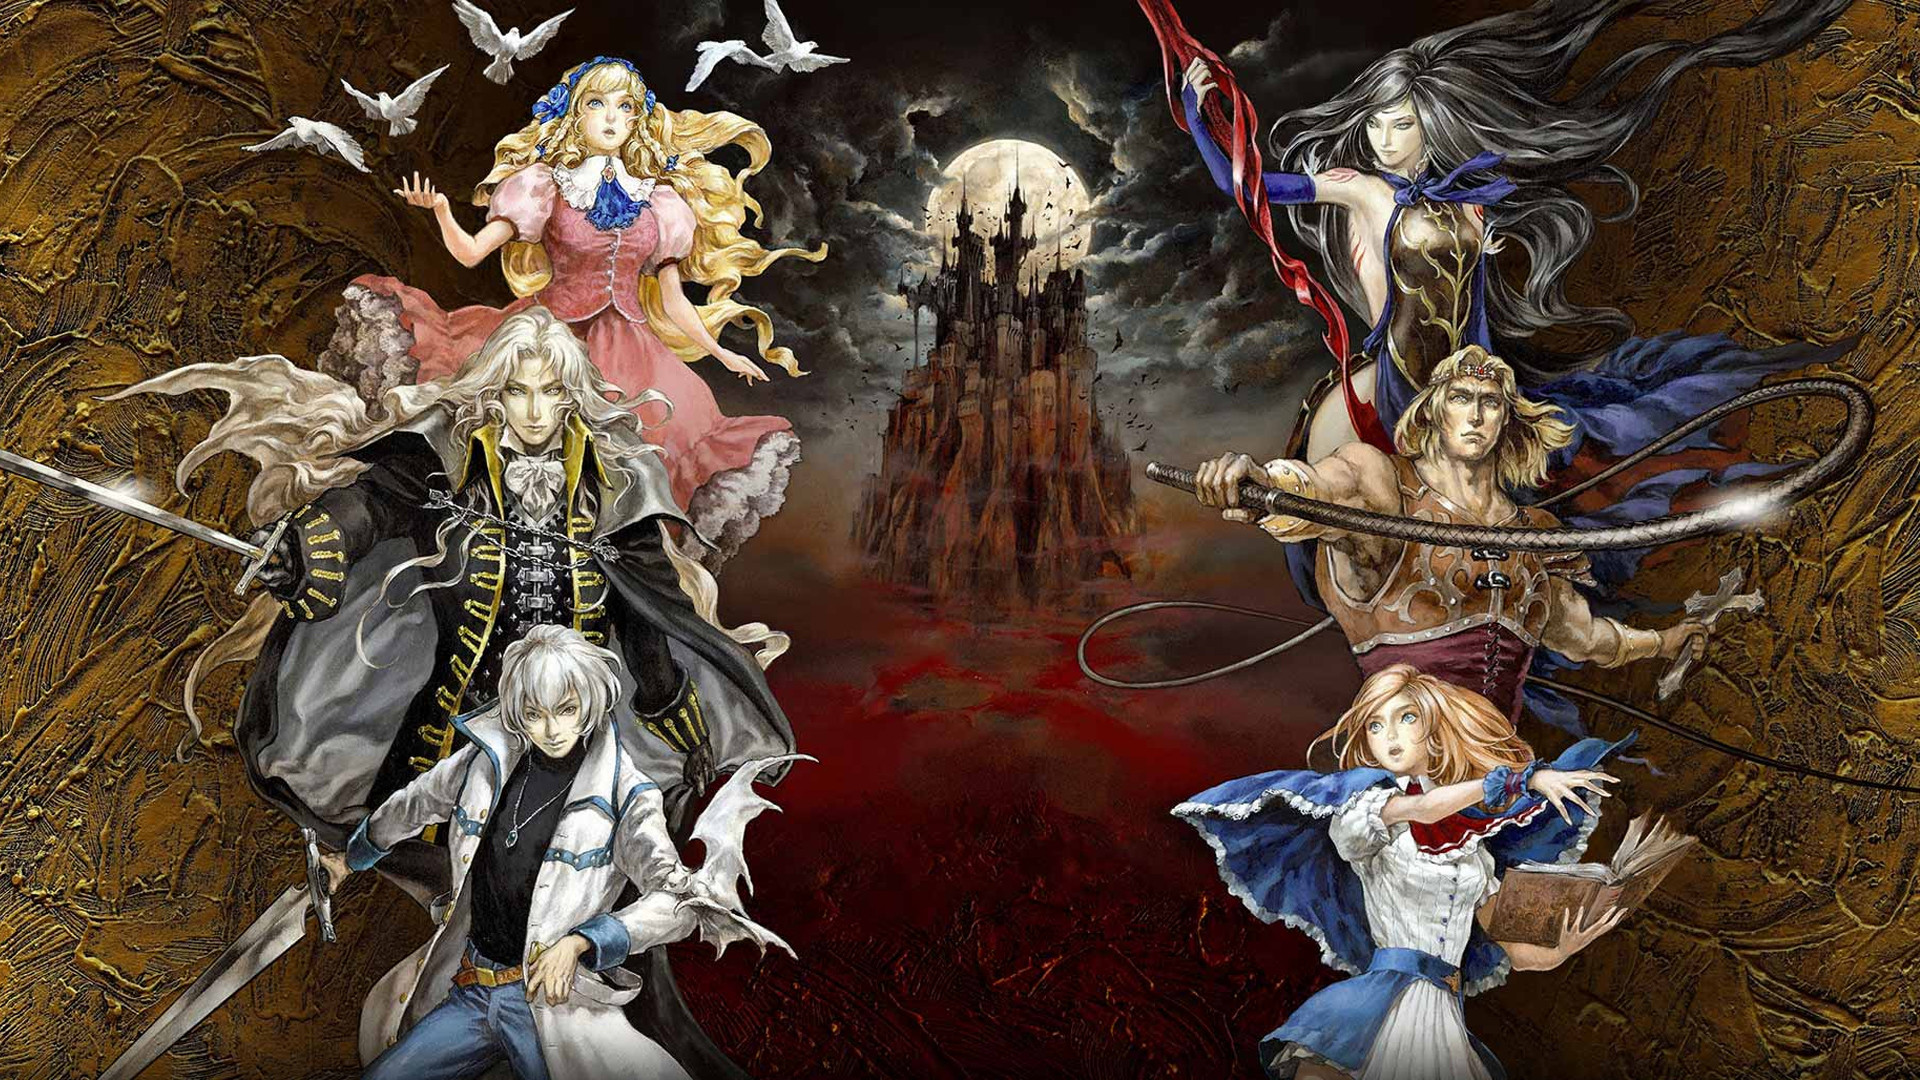 1920x1080 Wallpaper from Castlevania: Grimoire of Souls